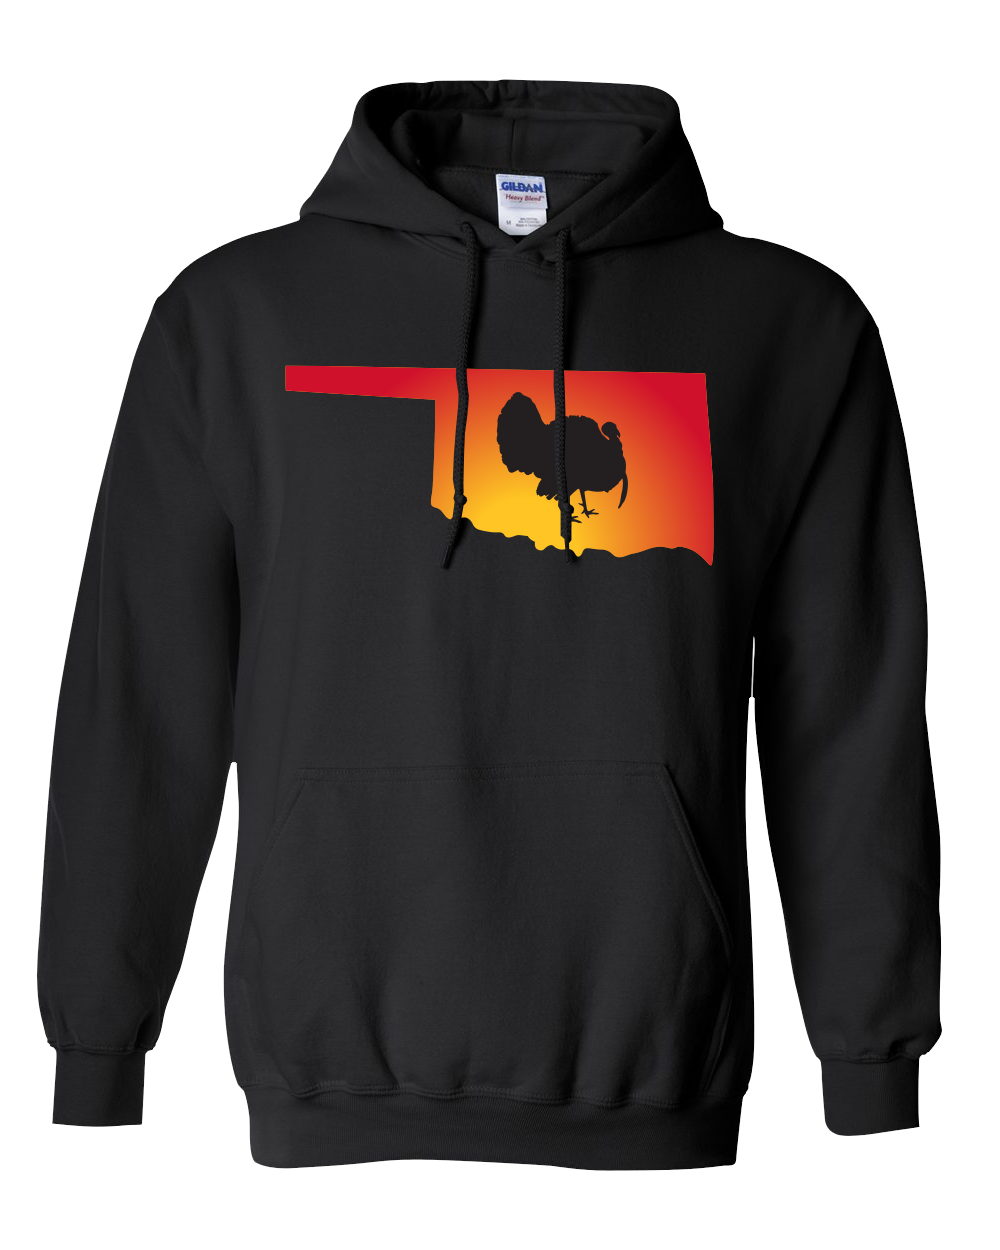 Pullover Hooded Sweatshirt Oklahoma Black Turkey Vibrant Design High Quality Tight Knit Ring Spun Low Maintenance Cotton Printed With The Newest Available Color Transfer Technology